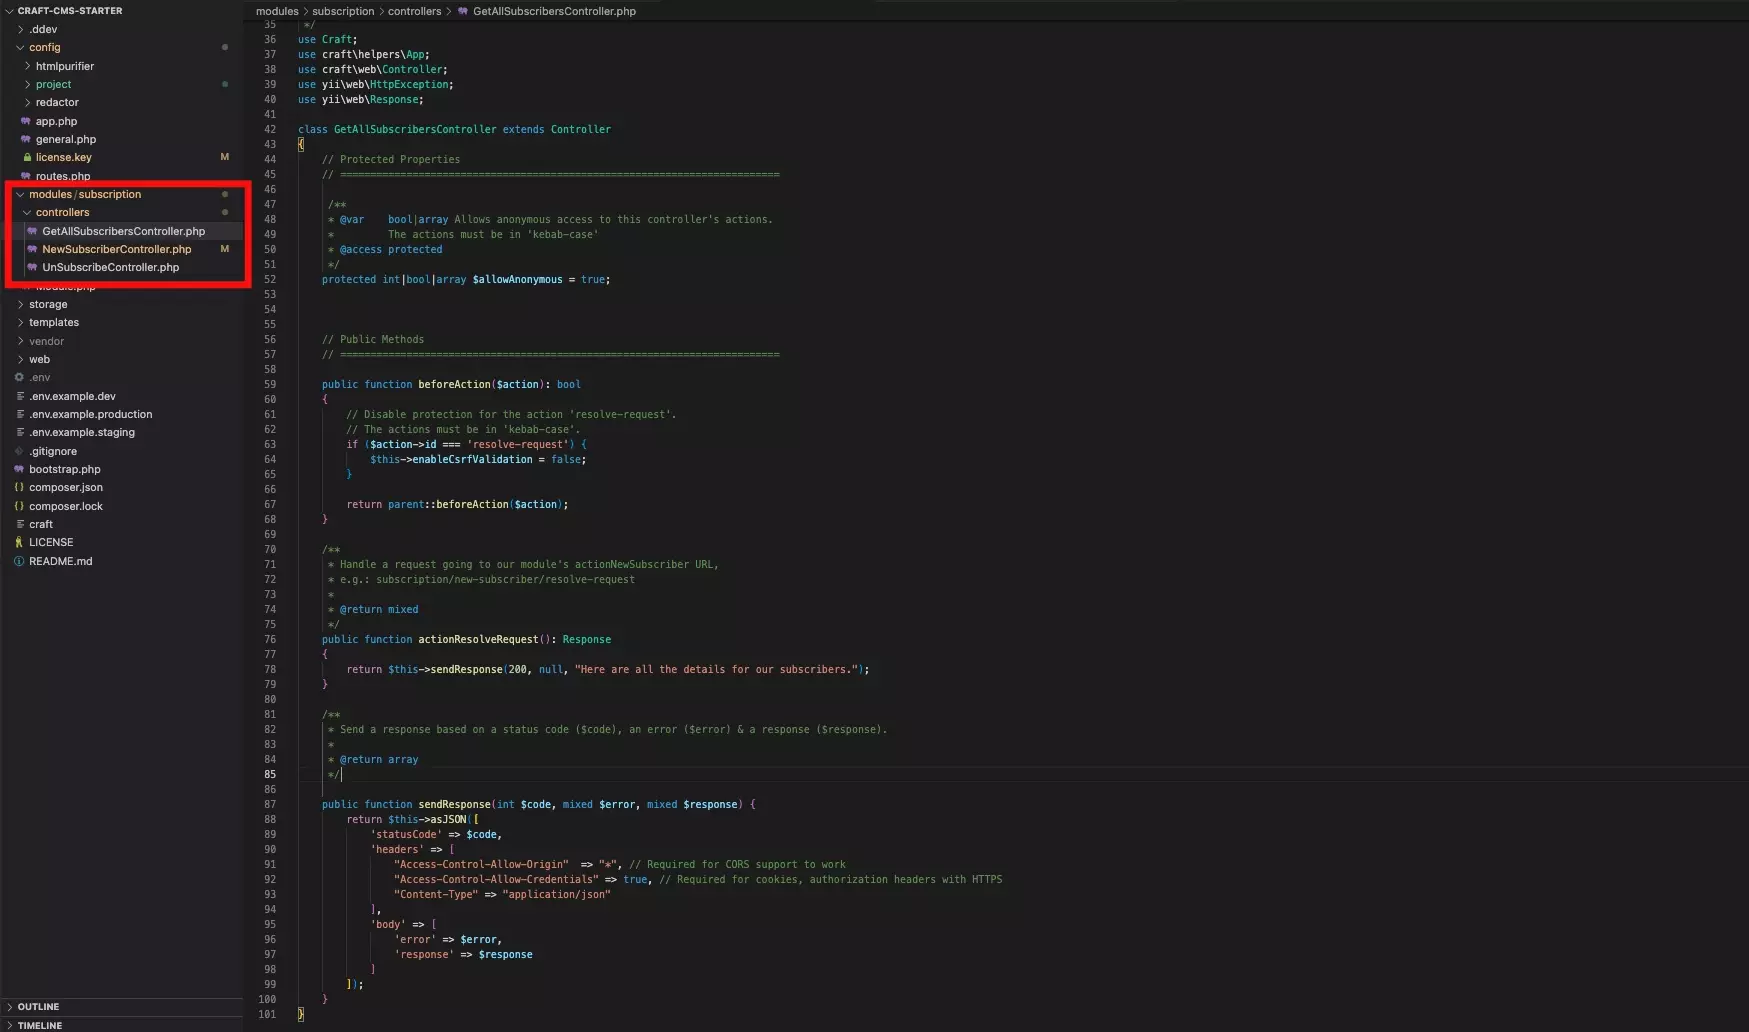 A screenshot of VSCode with the sample code for creating controllers offered below along with a highlight of where you need to place them in the project - in a "controllers" folder within your module.